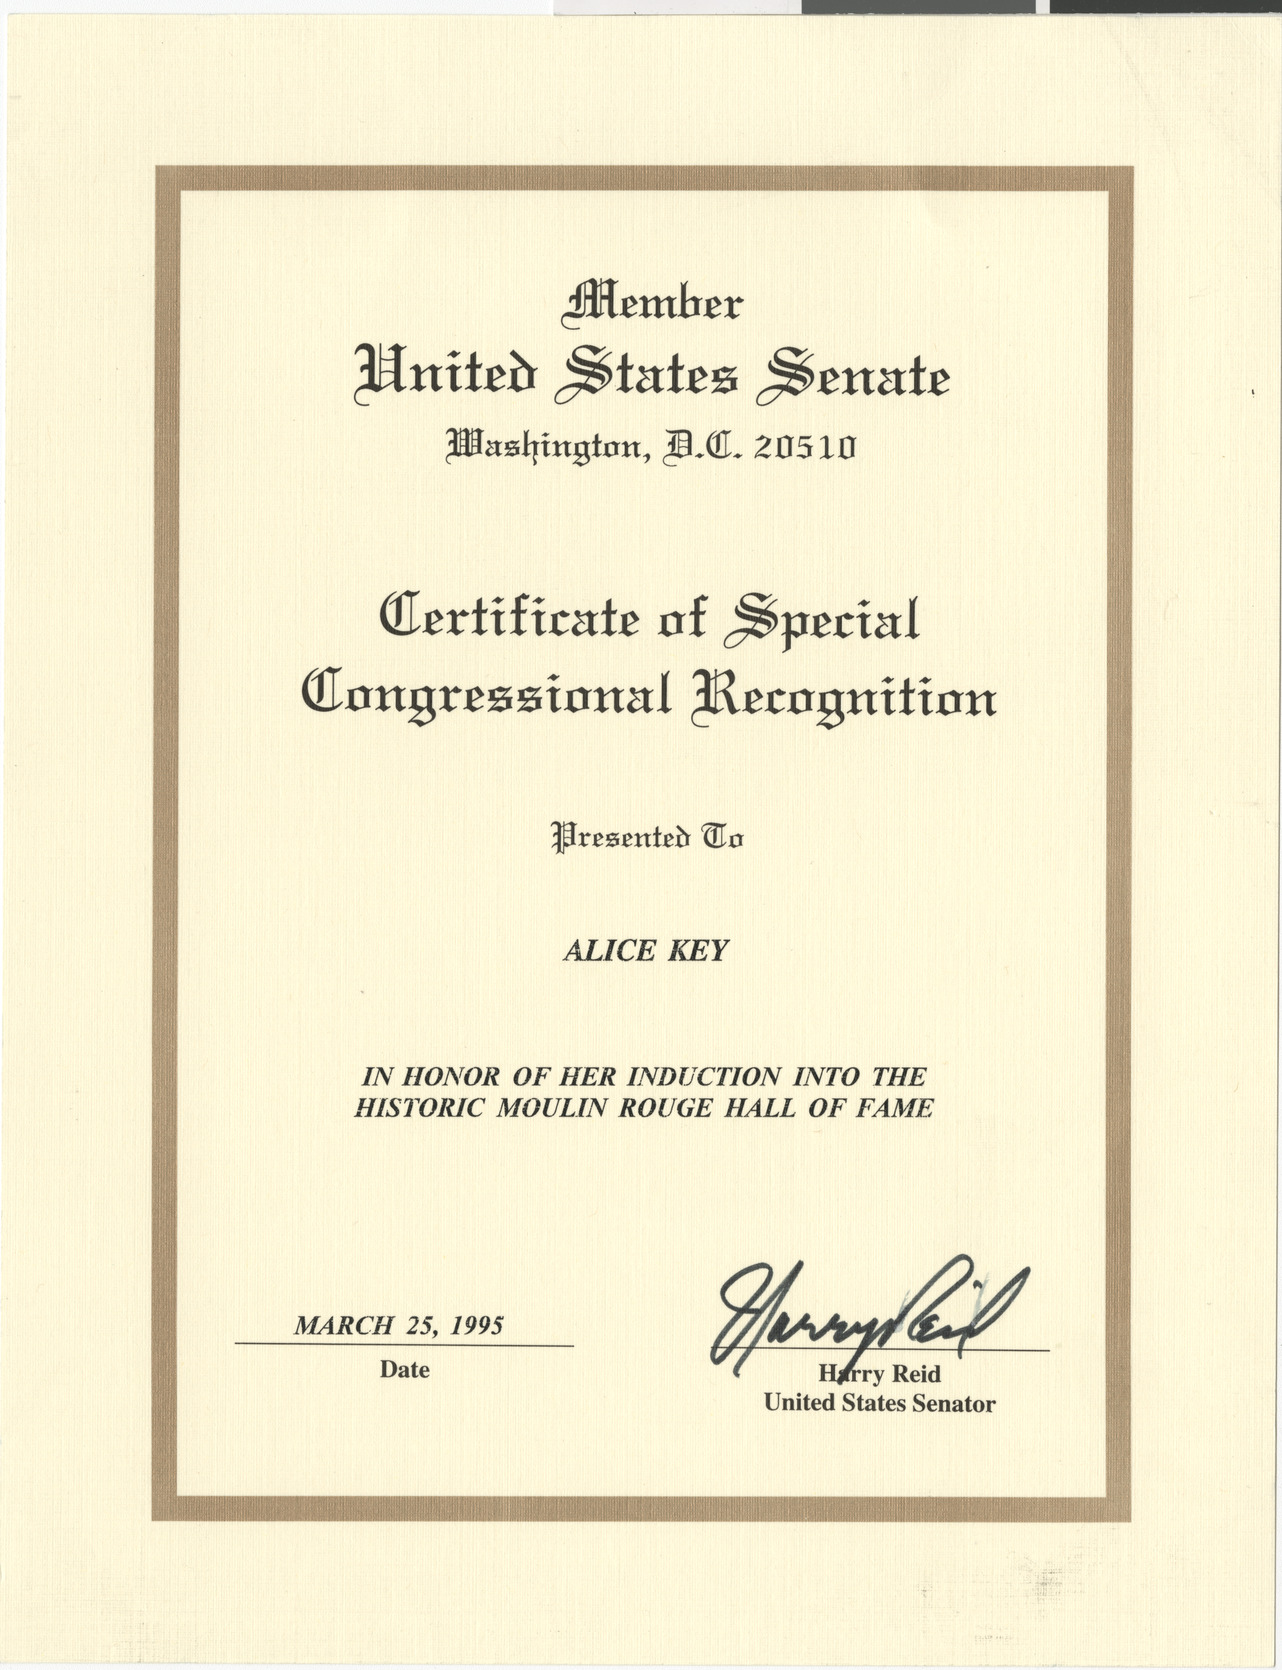 Certificate of Special Congressional Recognition from Senator Harry Reid to Alice Key in honor of her induction into the Historic Moulin Rouge Hall of Fame, March 25, 1995